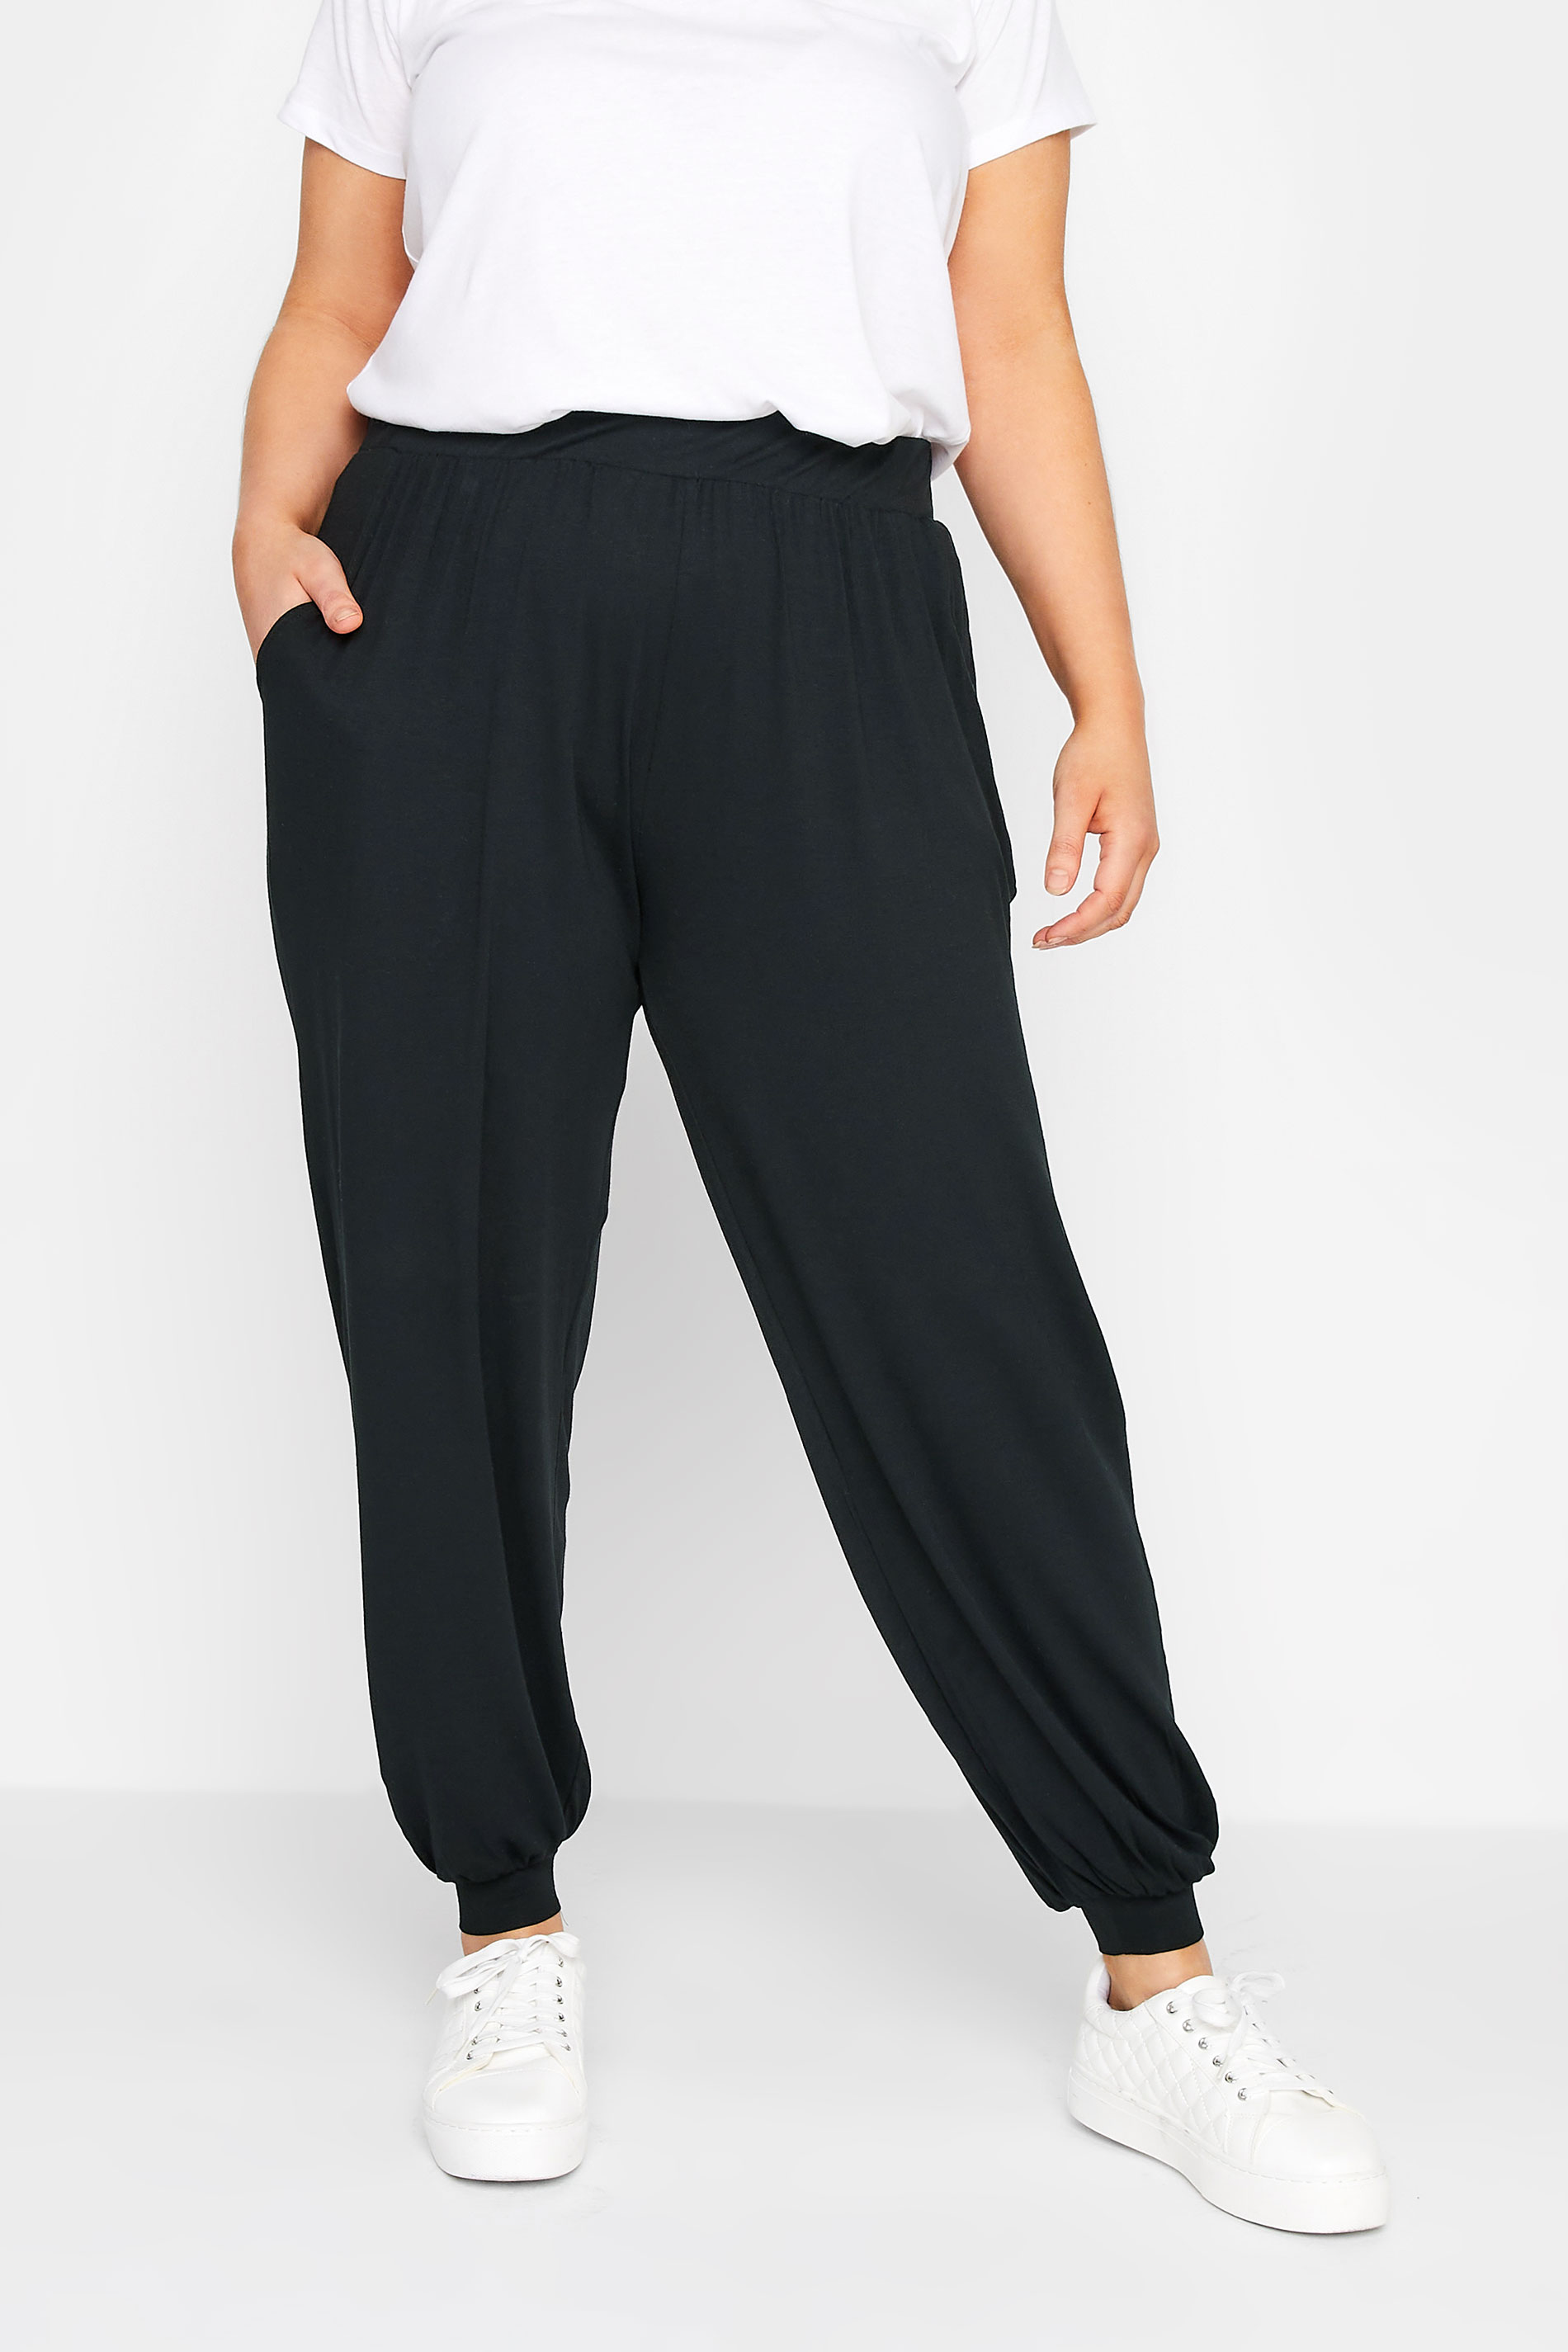 YOURS Plus Size Black Cuffed Harem Joggers | Yours Clothing 1